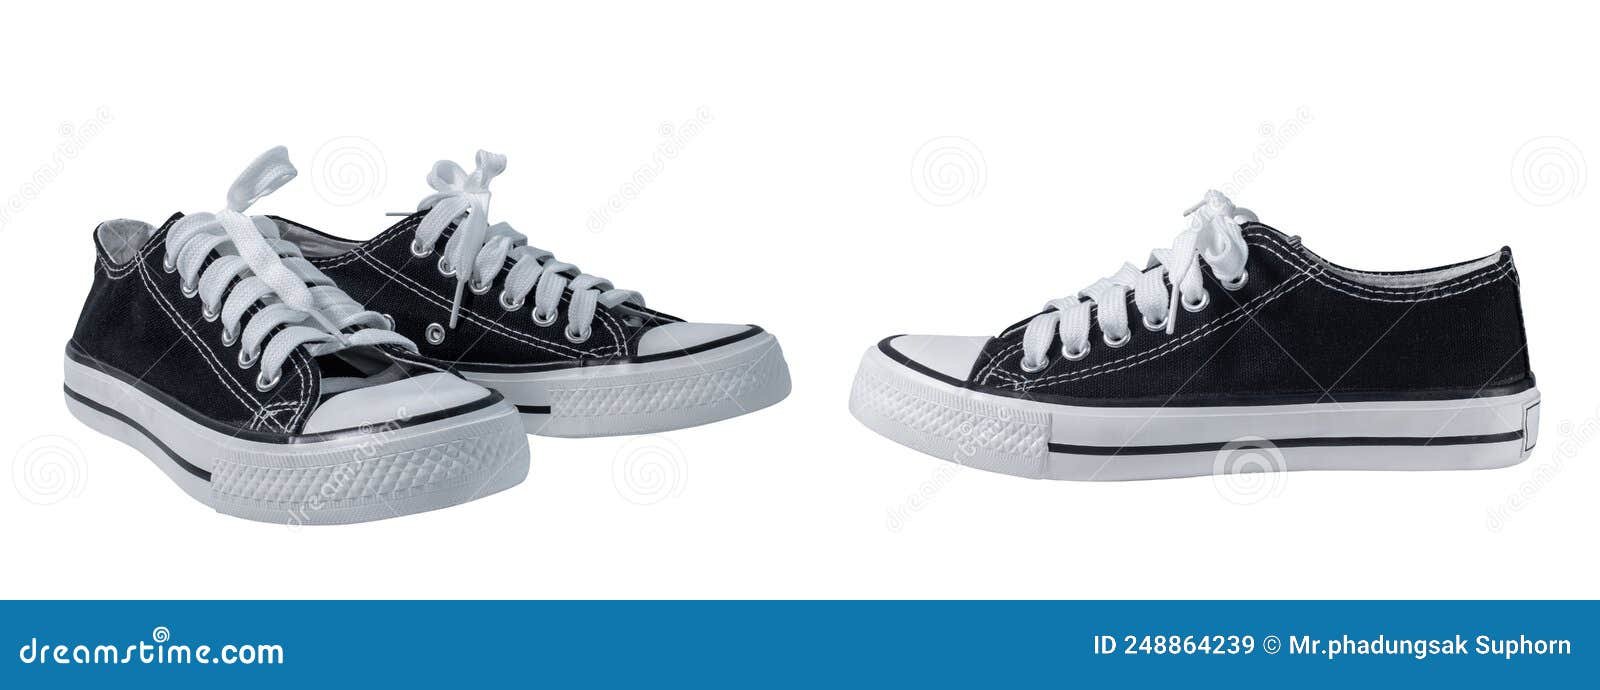 Black Shoes, Sneakers Isolated on White Background Stock Image - Image ...